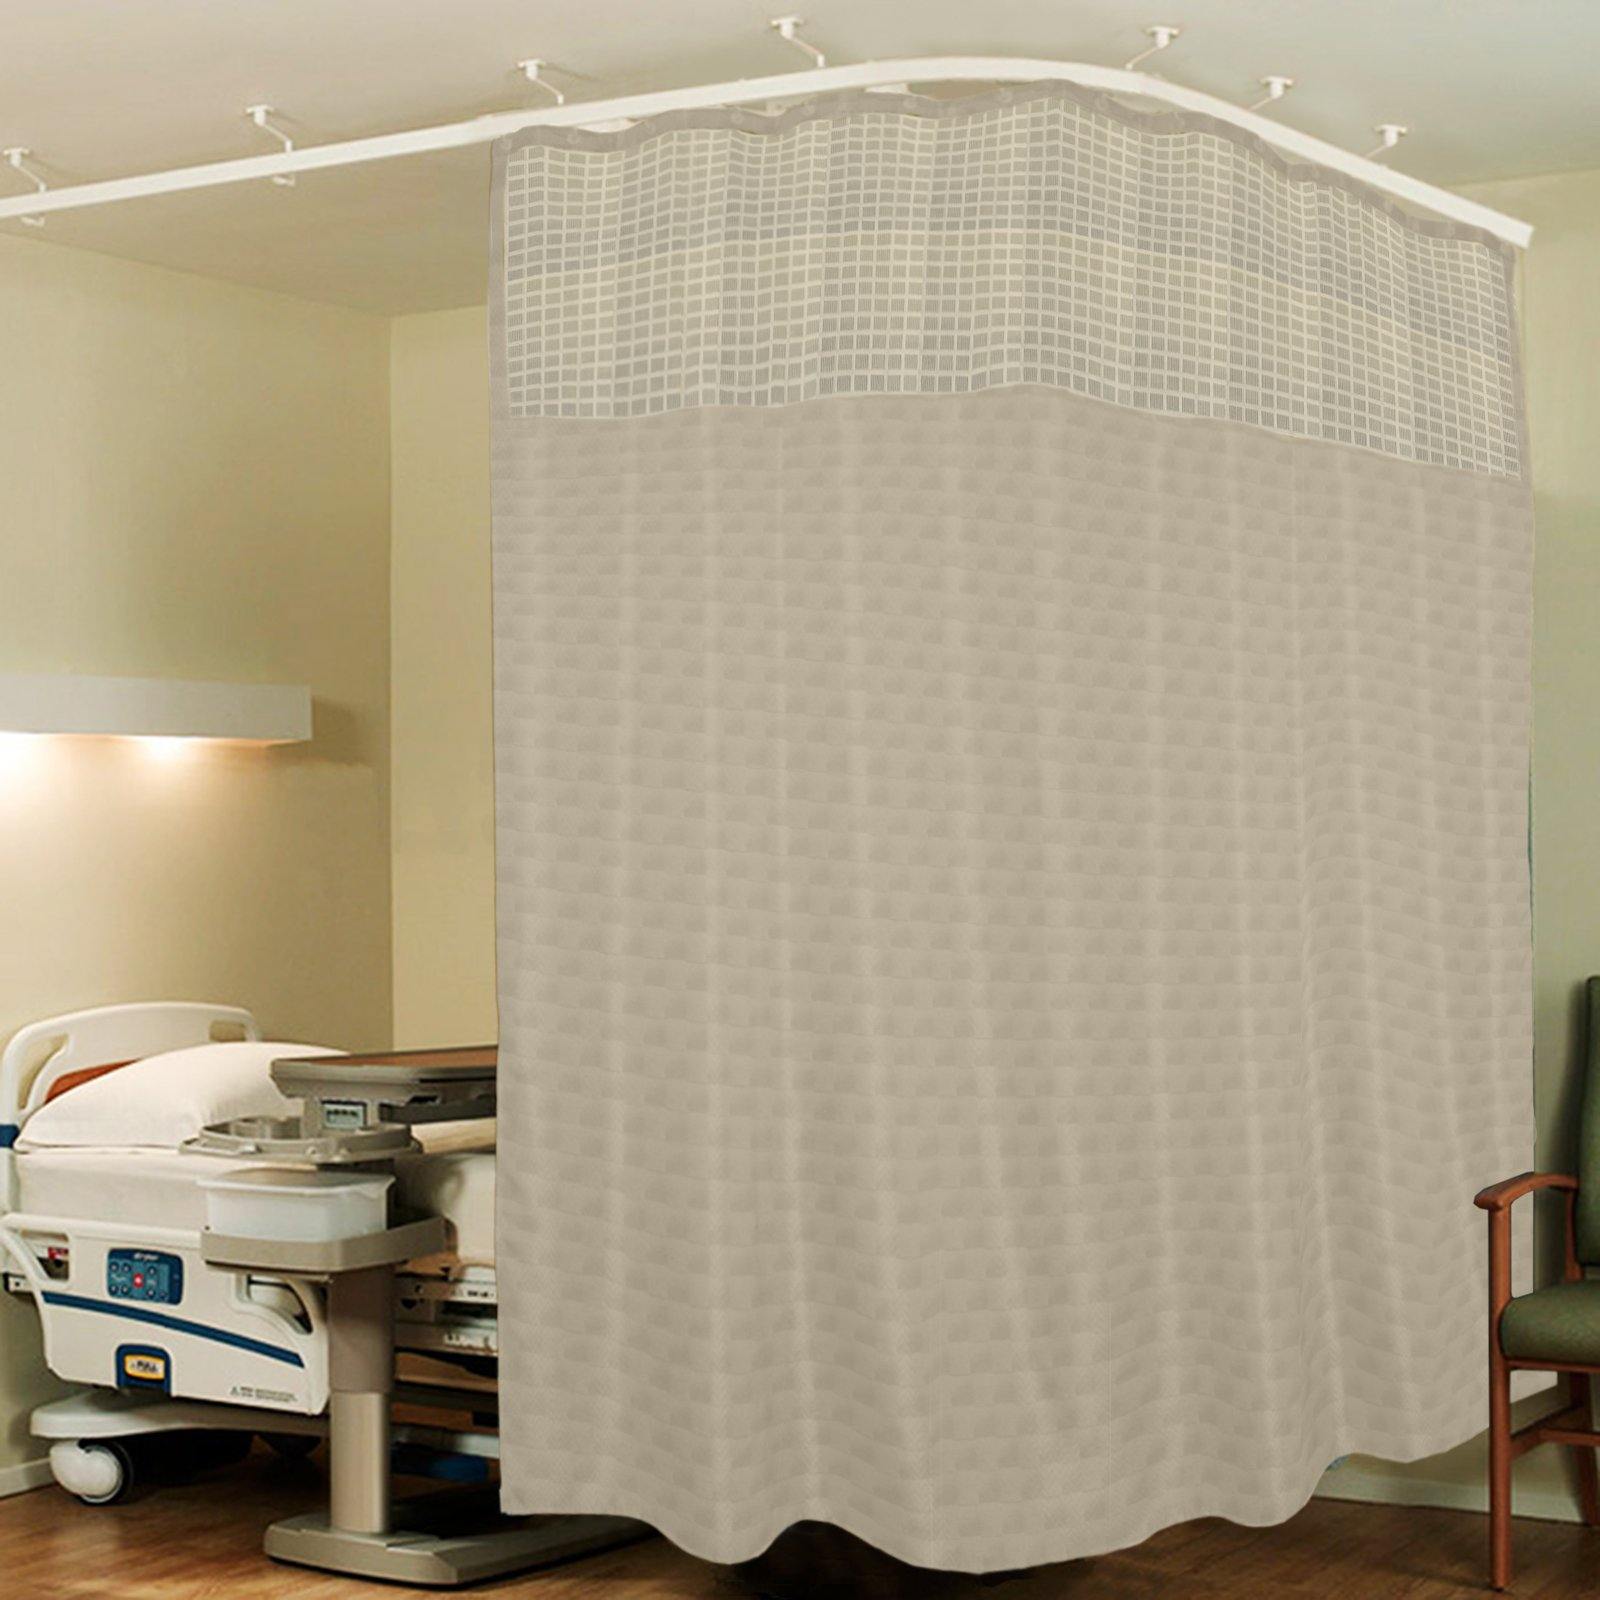 Lushomes Cream ICU Partition Cubes Square Net Hospital Curtain with 8 Eyelets and 8 C-Hooks (Size 244 X 215 cms, Single Pc, 2 partition Curtains Stitched Together) - Lushomes